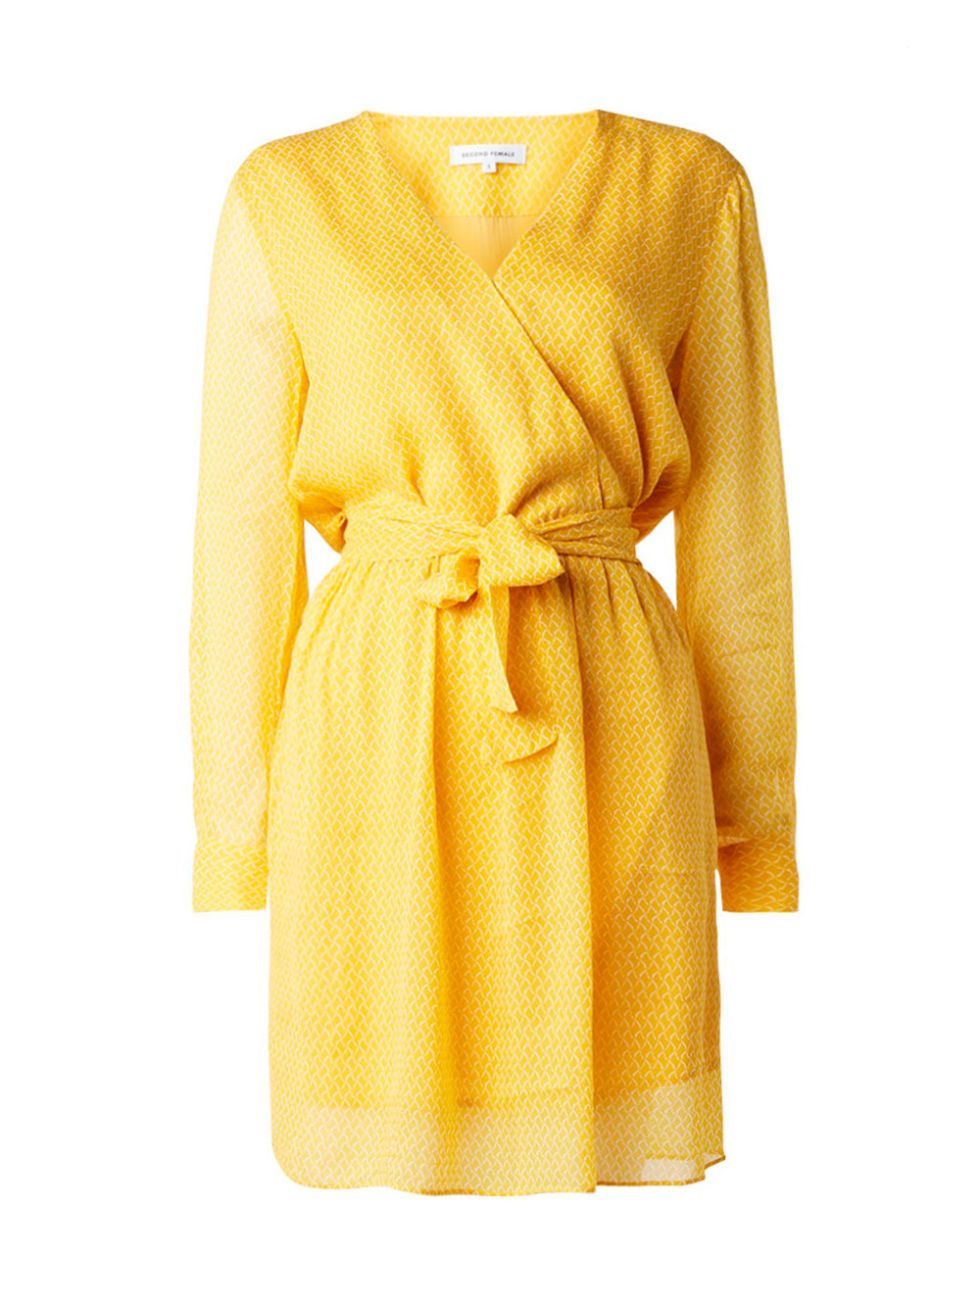 Clothing, Yellow, Dress, Day dress, Sleeve, Outerwear, Robe, Cocktail dress, Wrap, Neck, 